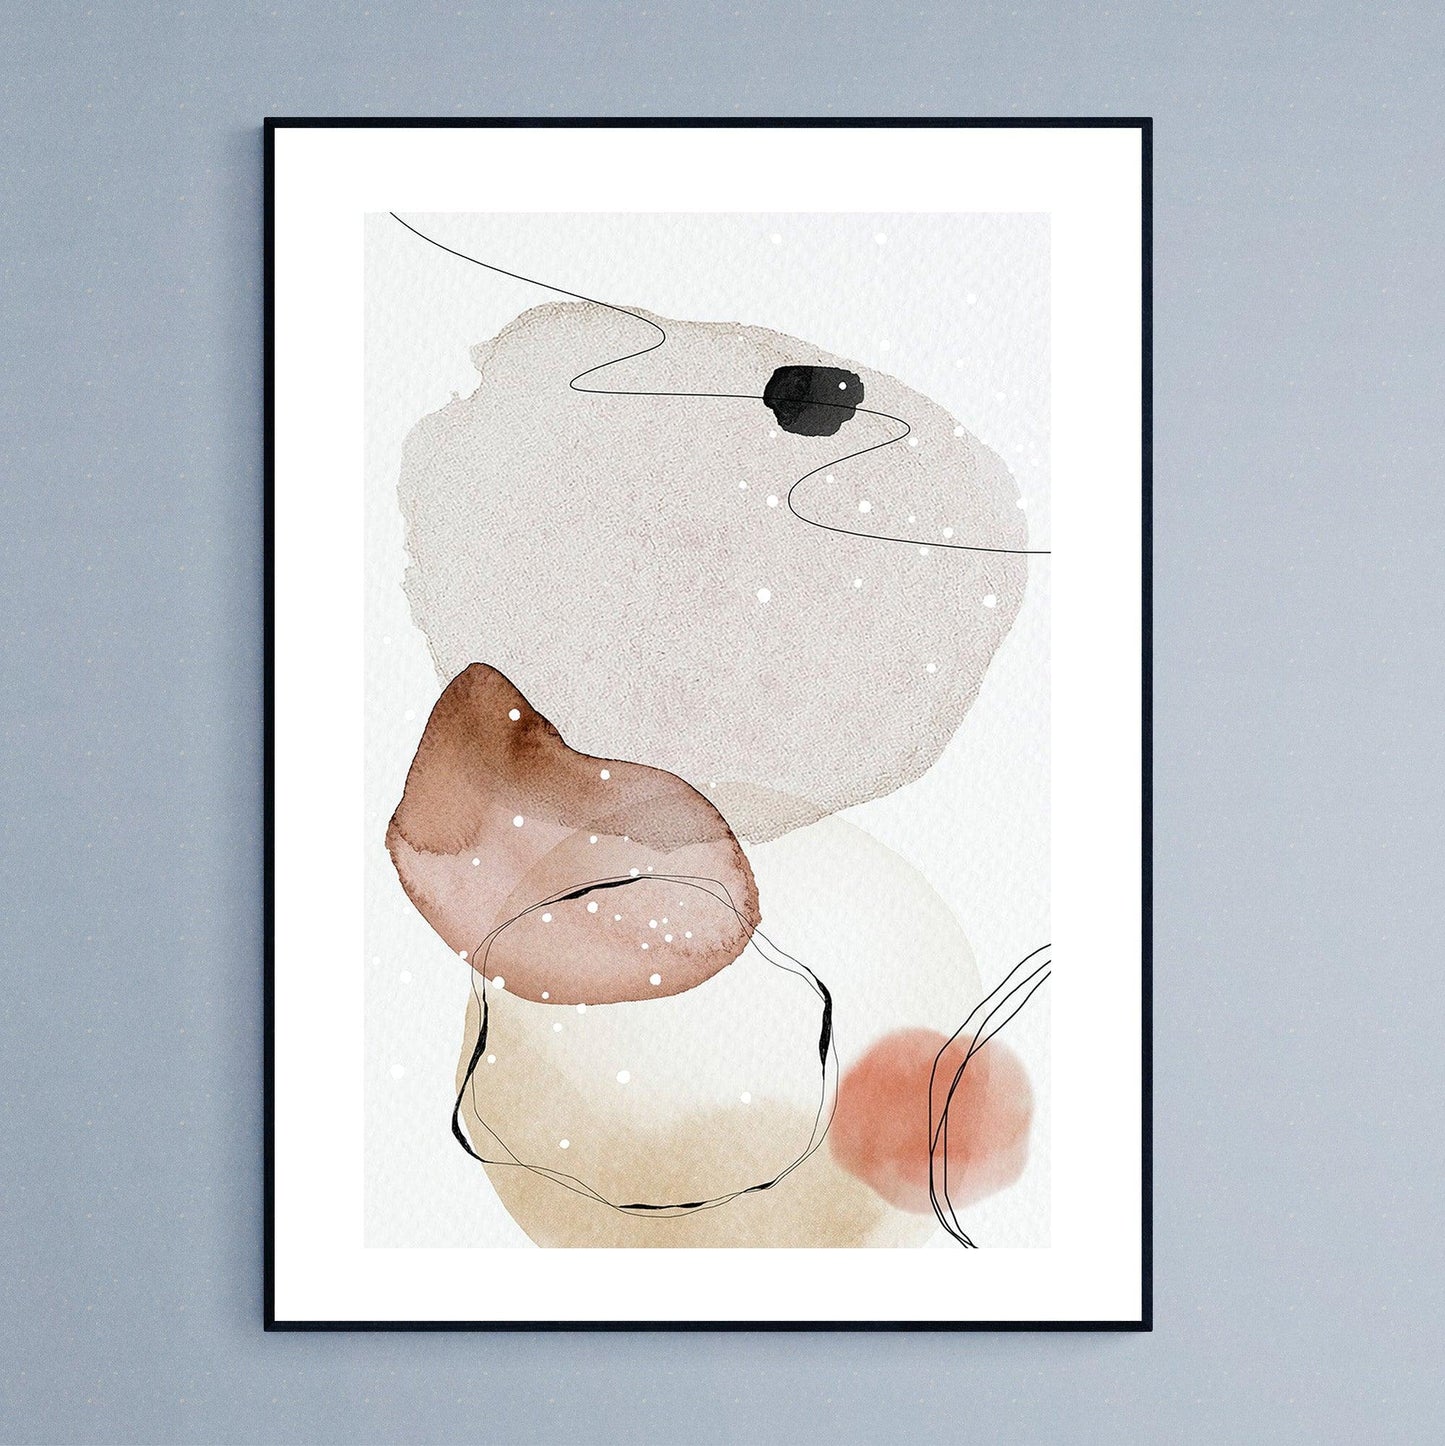 Our NAVY RUST ABSTRACT PART 2 Set of 3 Posters wall prints are the perfect finishing touch for any home or office interior, so you can kiss goodbye to naked walls, as you decorate them with this elegant wall art that compliments the space.   Add a modern twist to your interior with our stylish, botanical wall art. Now you can download for FREE this pack of 3 elegant posters to print.